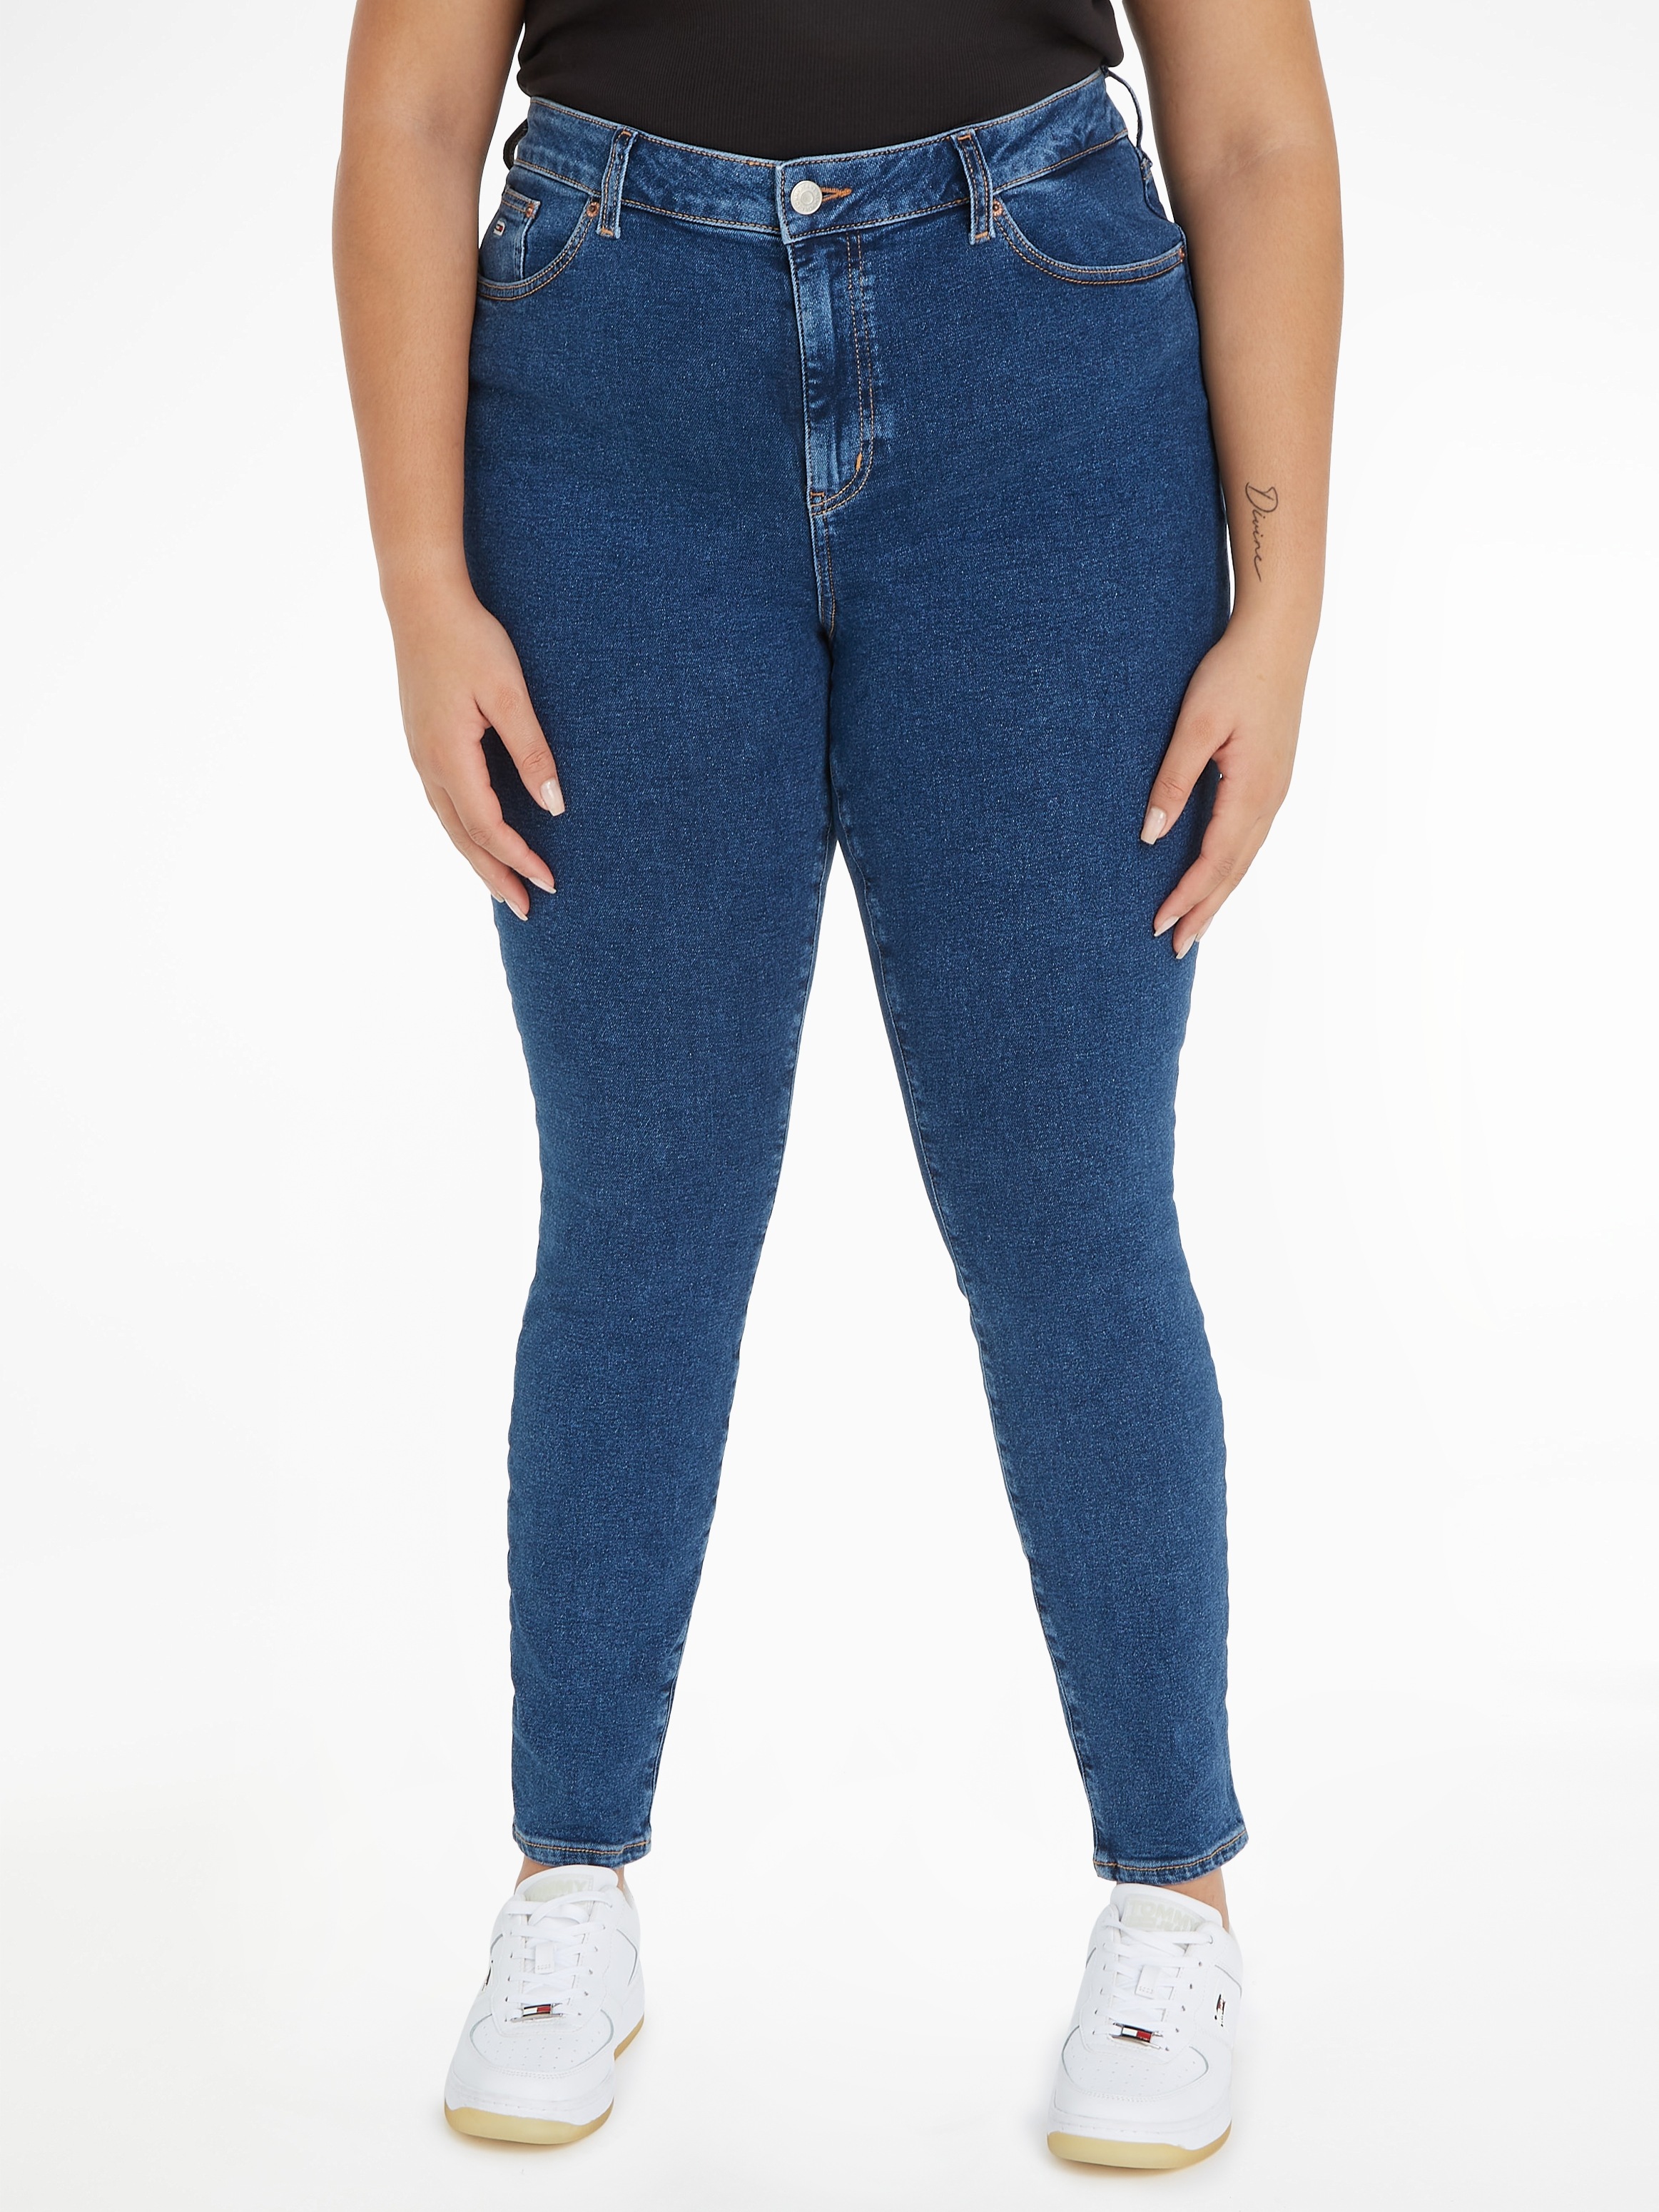 Tommy Jeans Curve angeboten CURVE, SIZE bei PLUS Jeans Weiten wird in OTTOversand Skinny-fit-Jeans